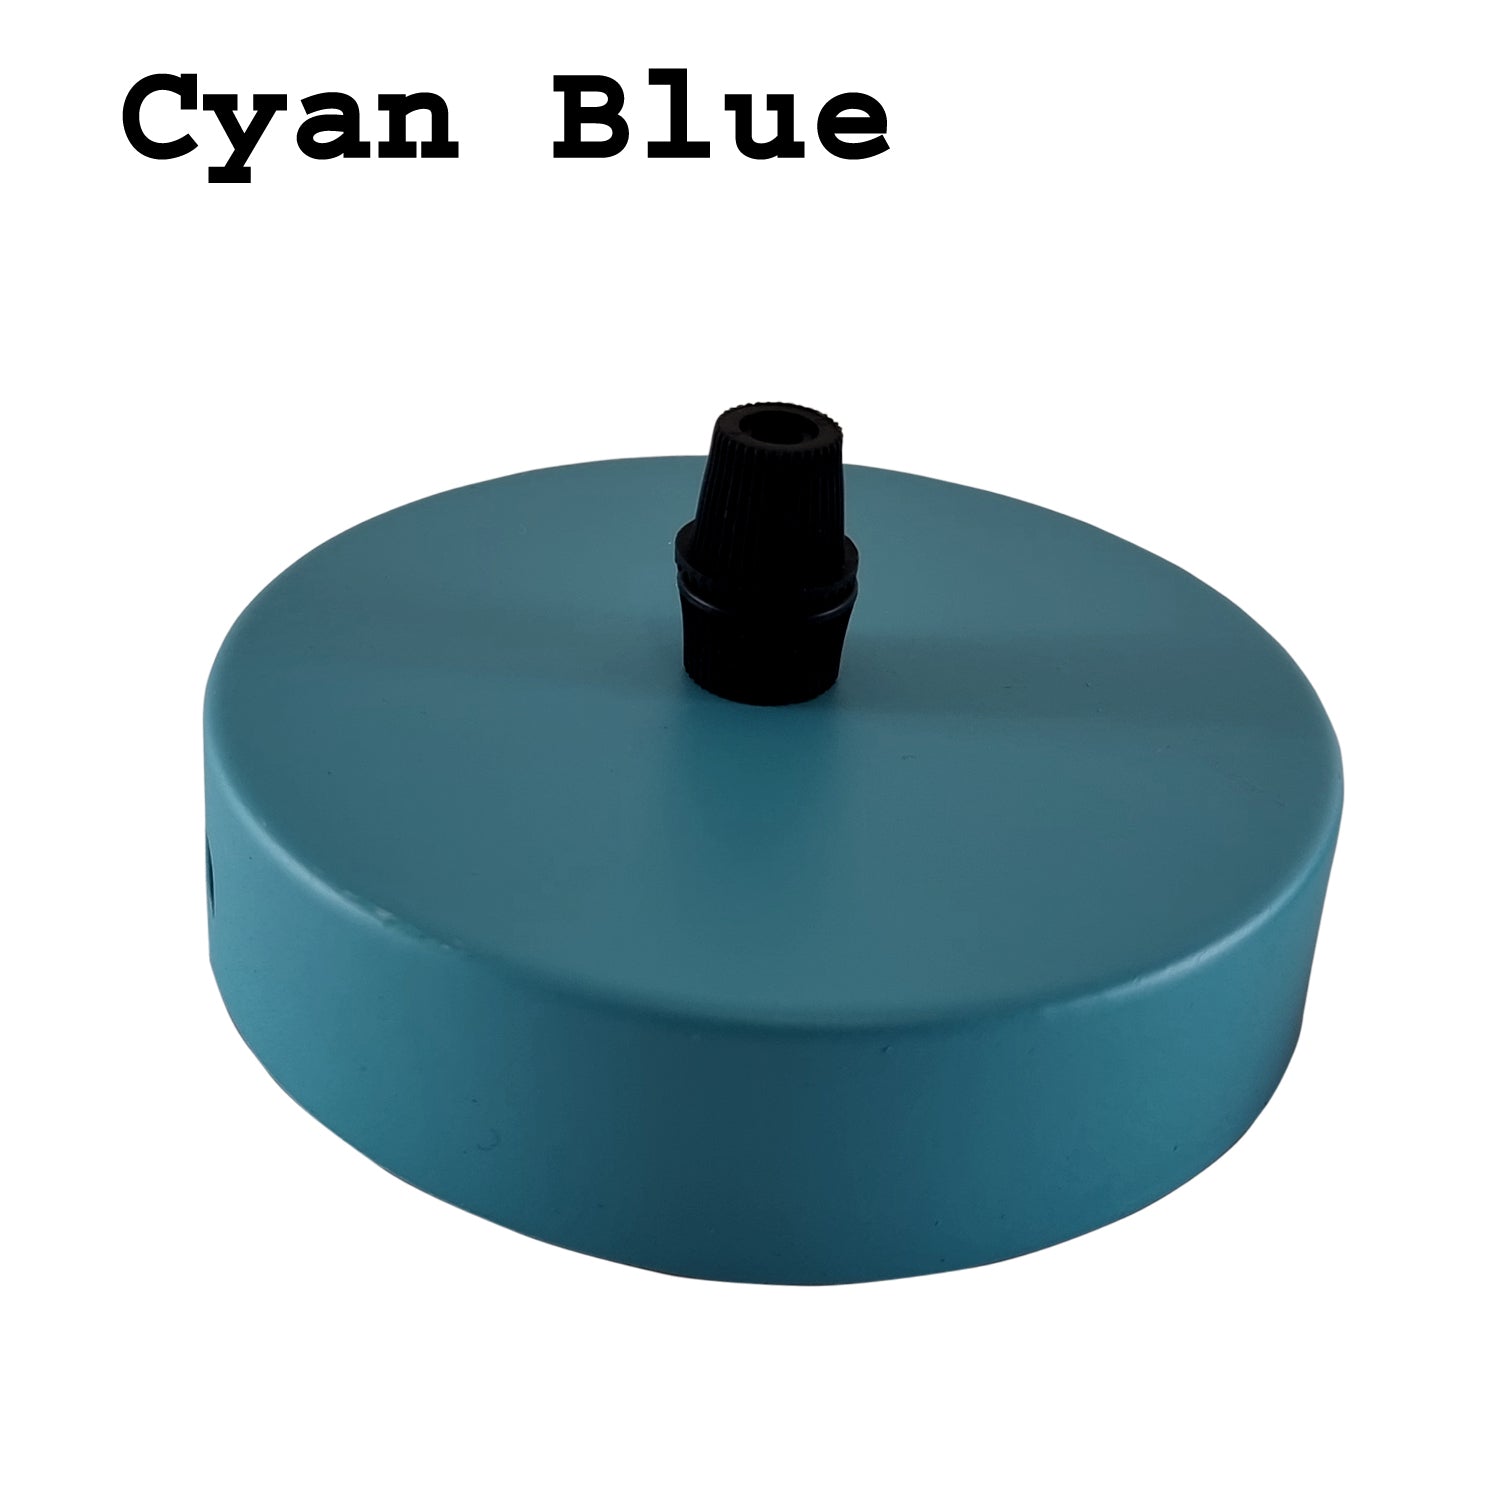 Cyan Blue Rose Single Point Drop Outlet Light Fitting